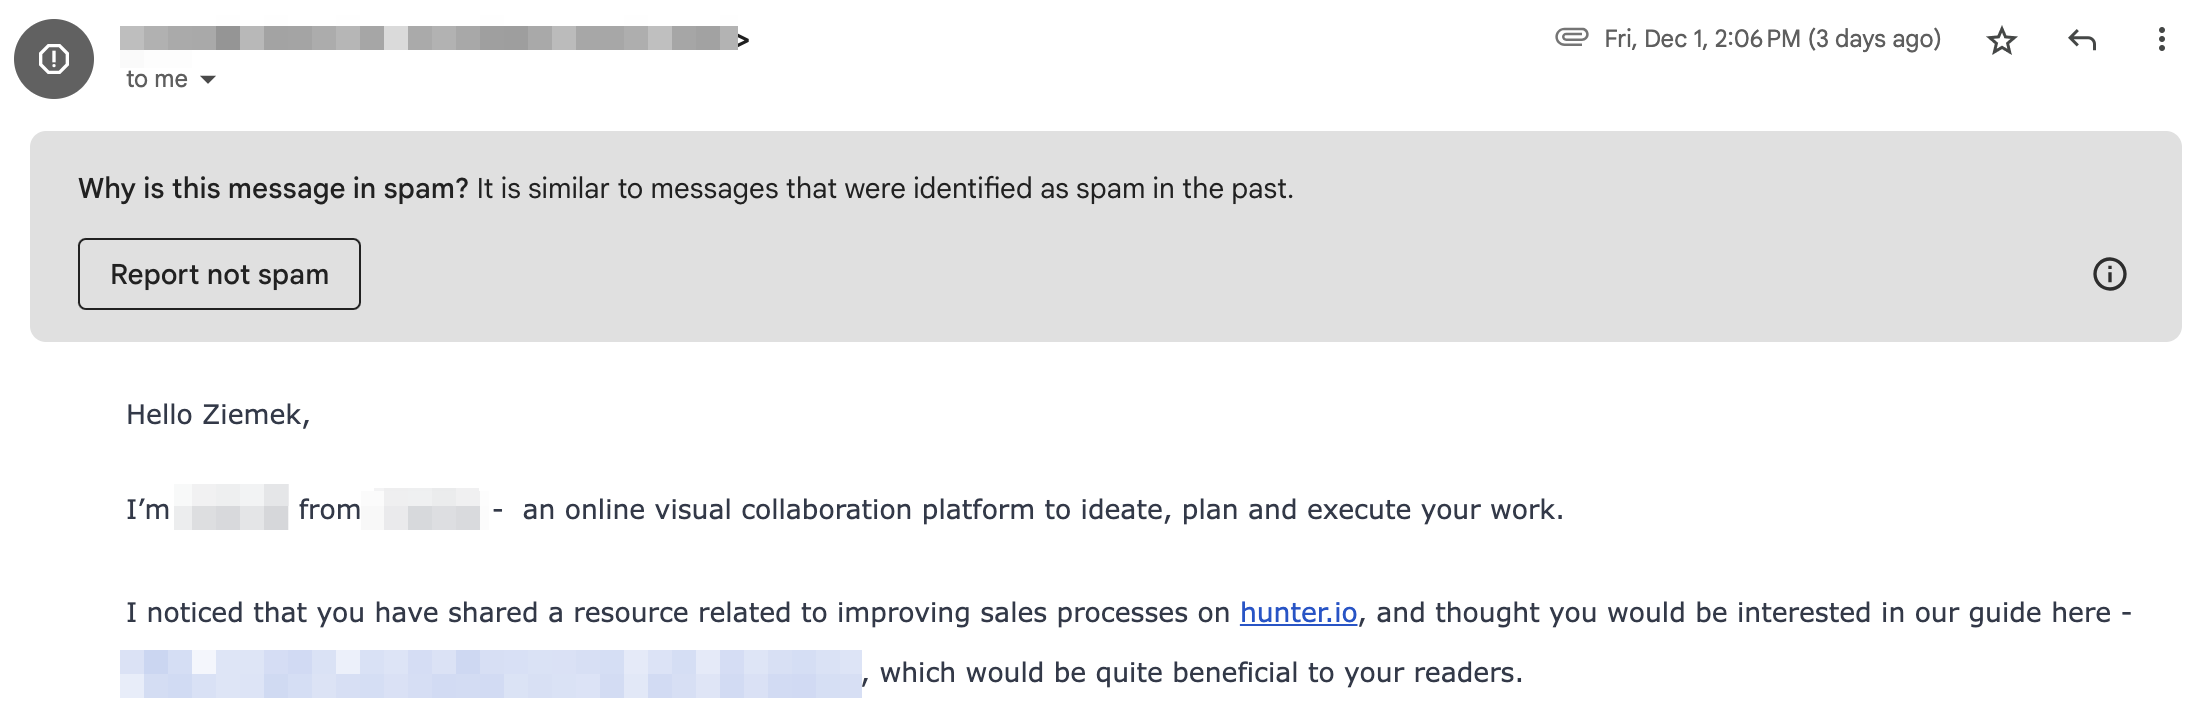 An example of an email that landed in spam, which impacted its open rate